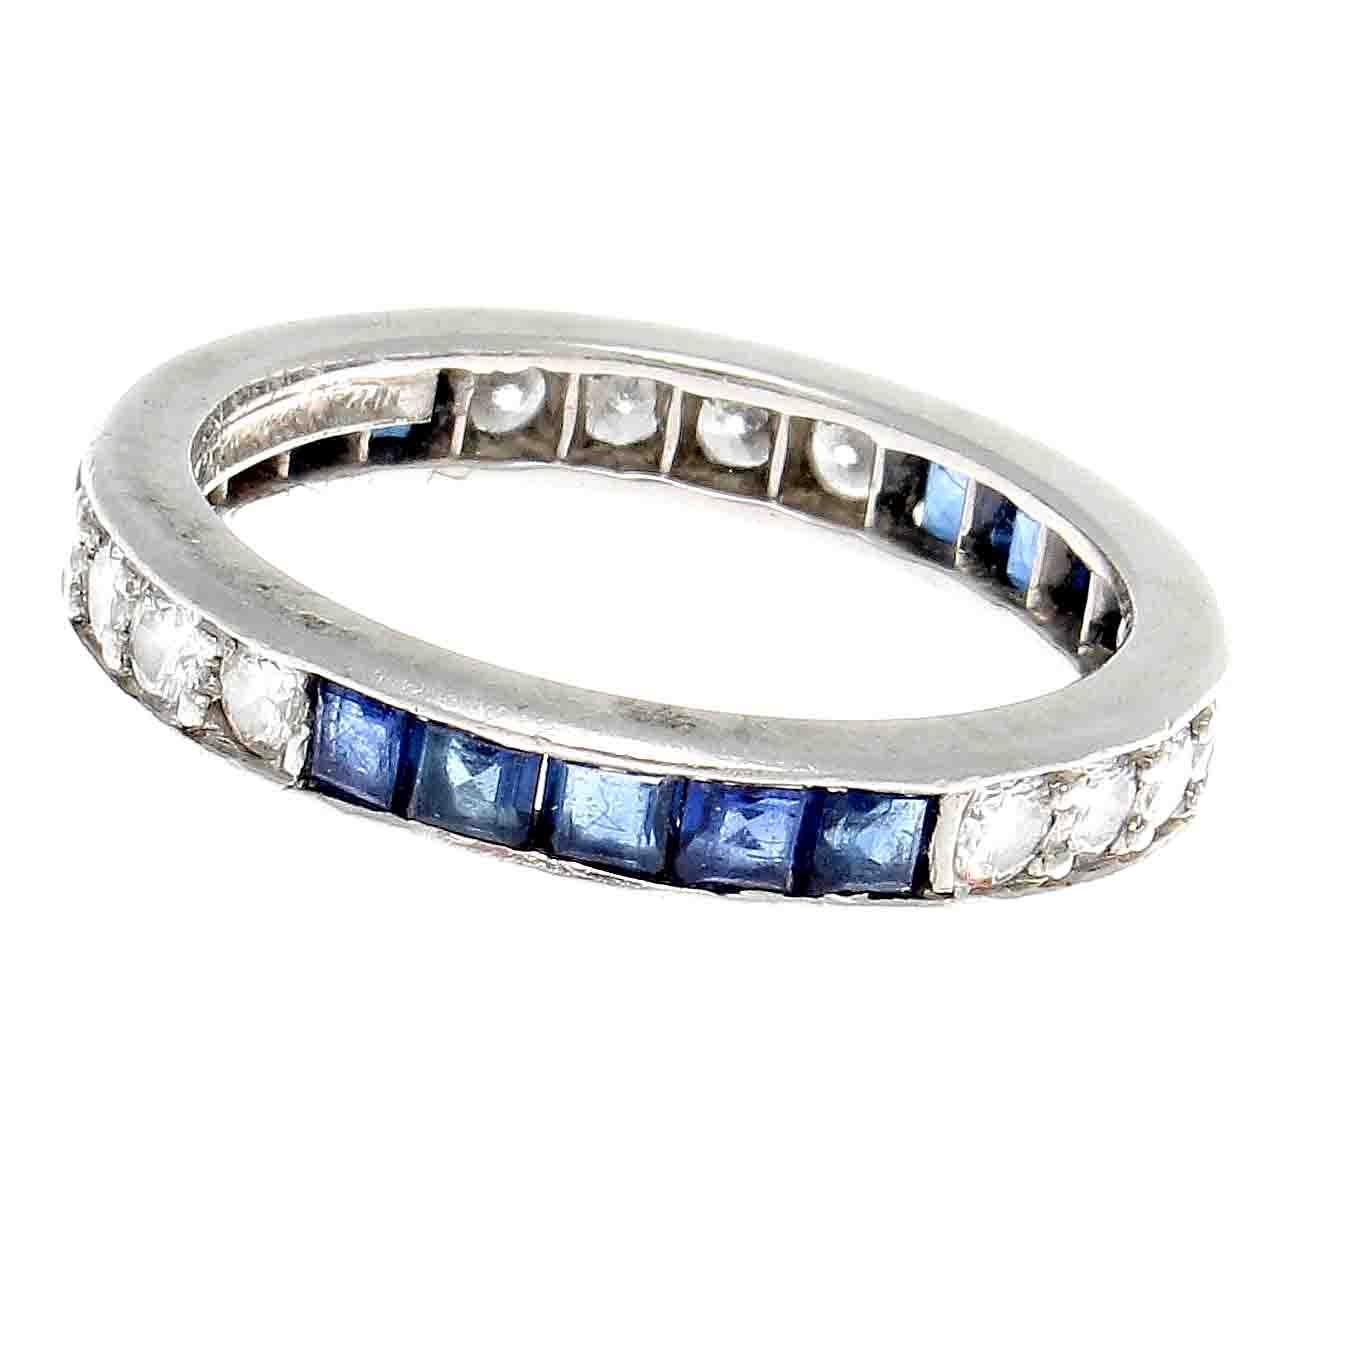 Tiffany is the leader in quality and design of engagement and wedding rings. Their ingenuity has lead them to over 100 years of excellence.Featuring a unique combination of square cut navy blue sapphires alternating with sections of colorless